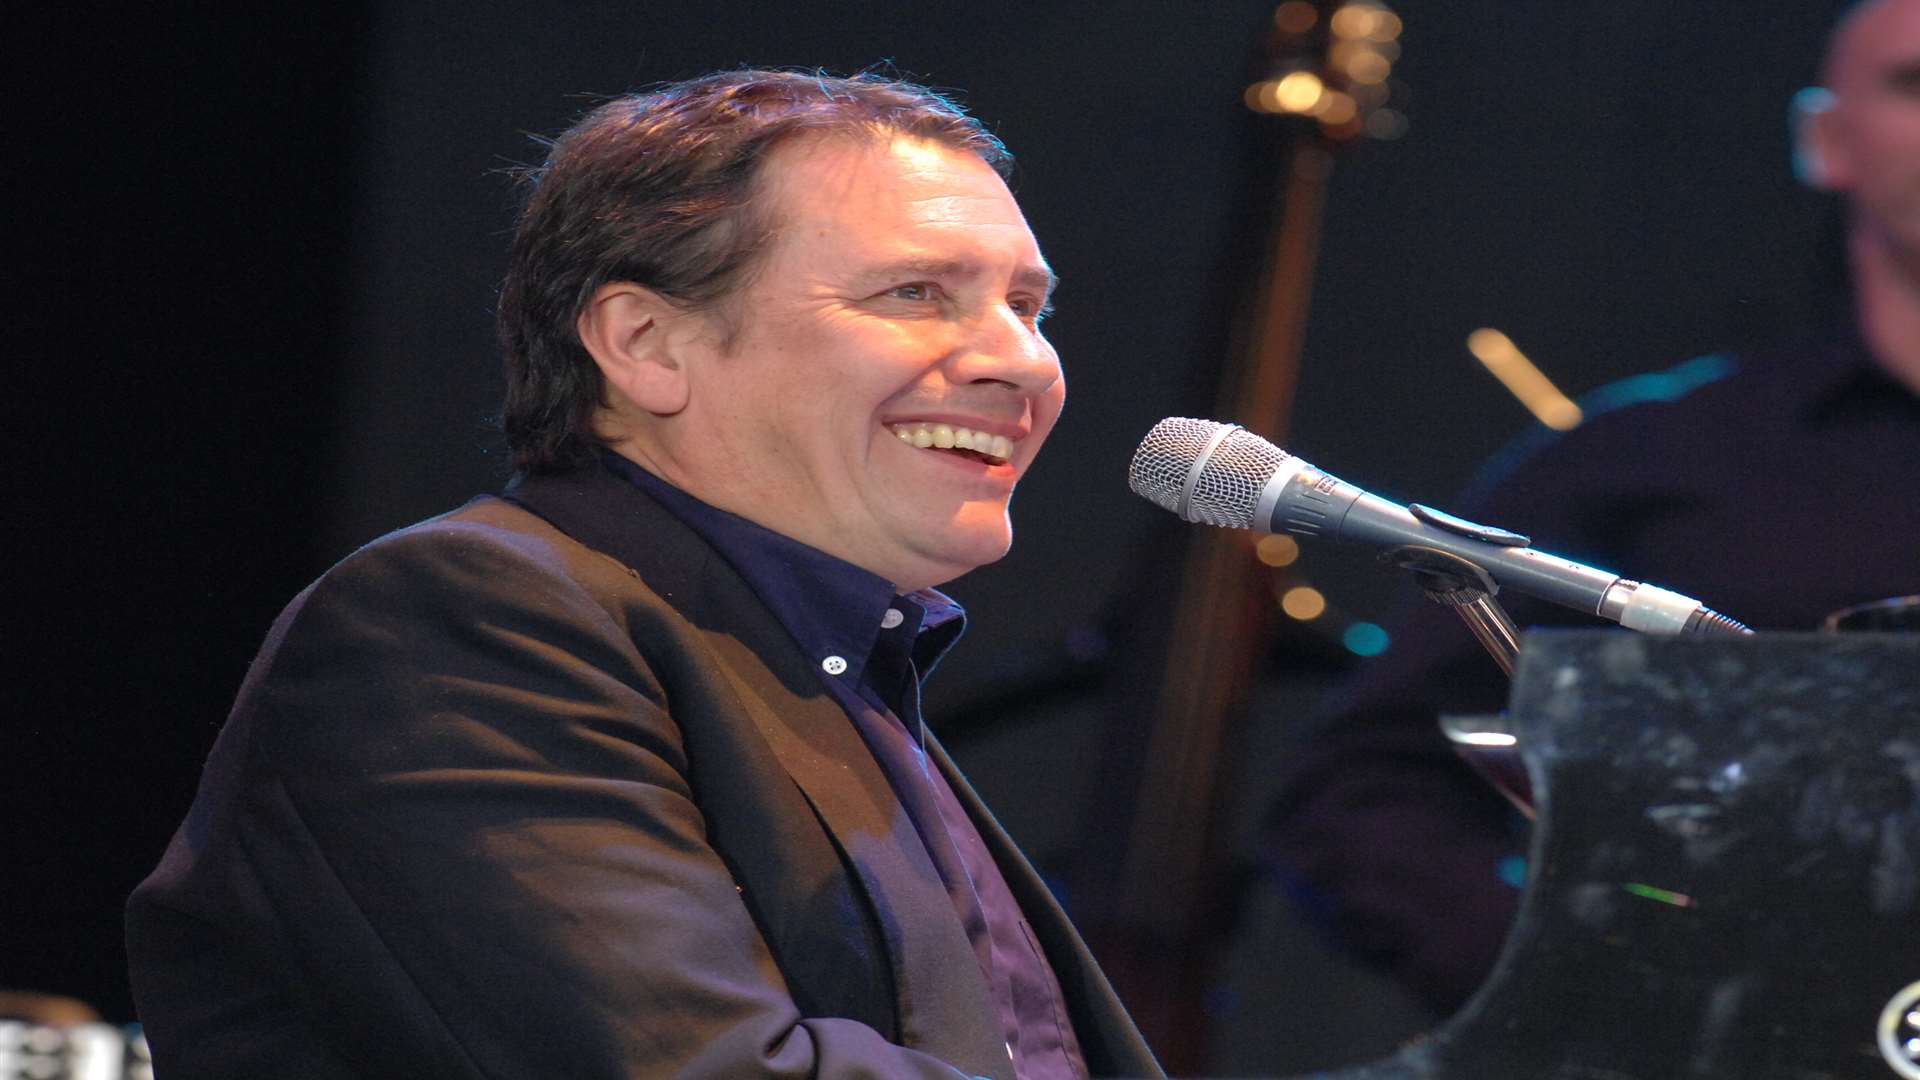 Jools playing at Rochester Castle